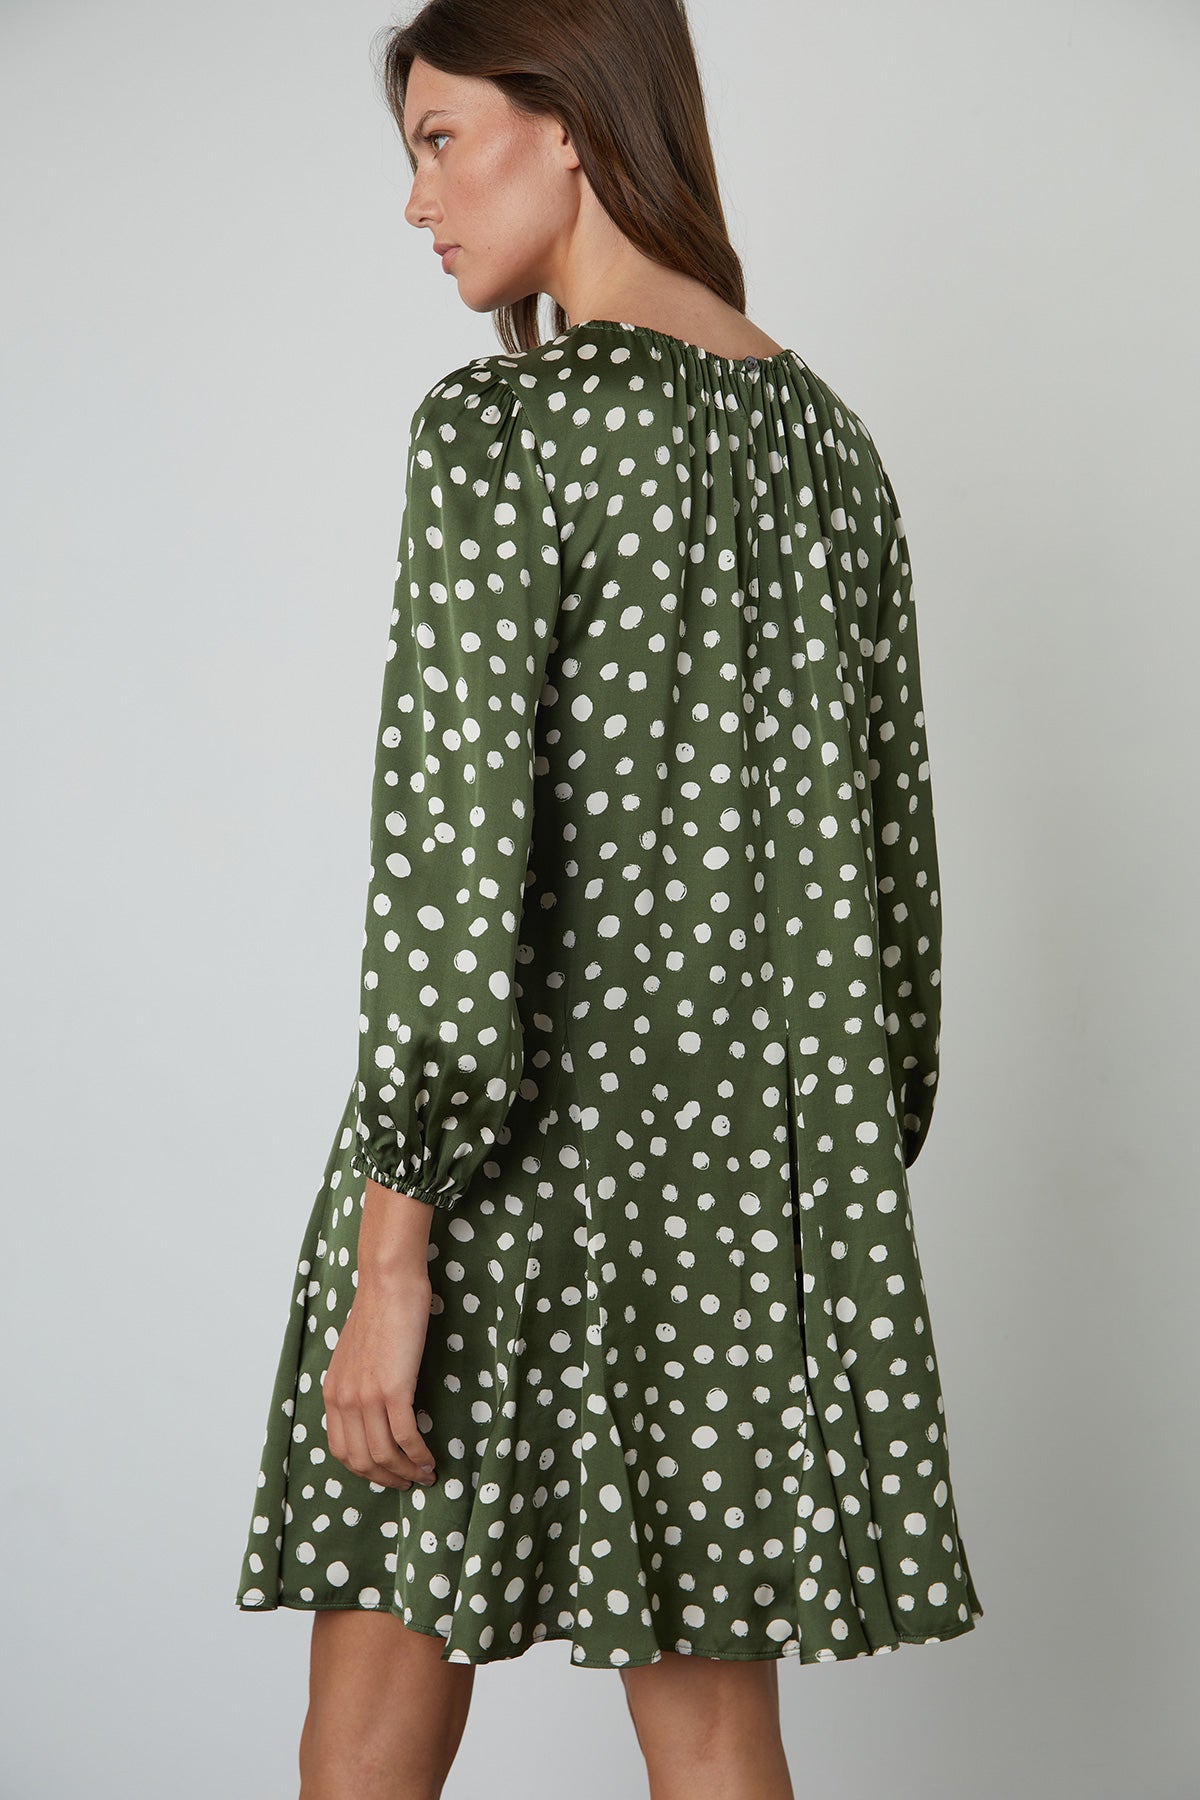 Kenia Polka Dot Dress with Green Background and Cream Dots Back-25078342025409